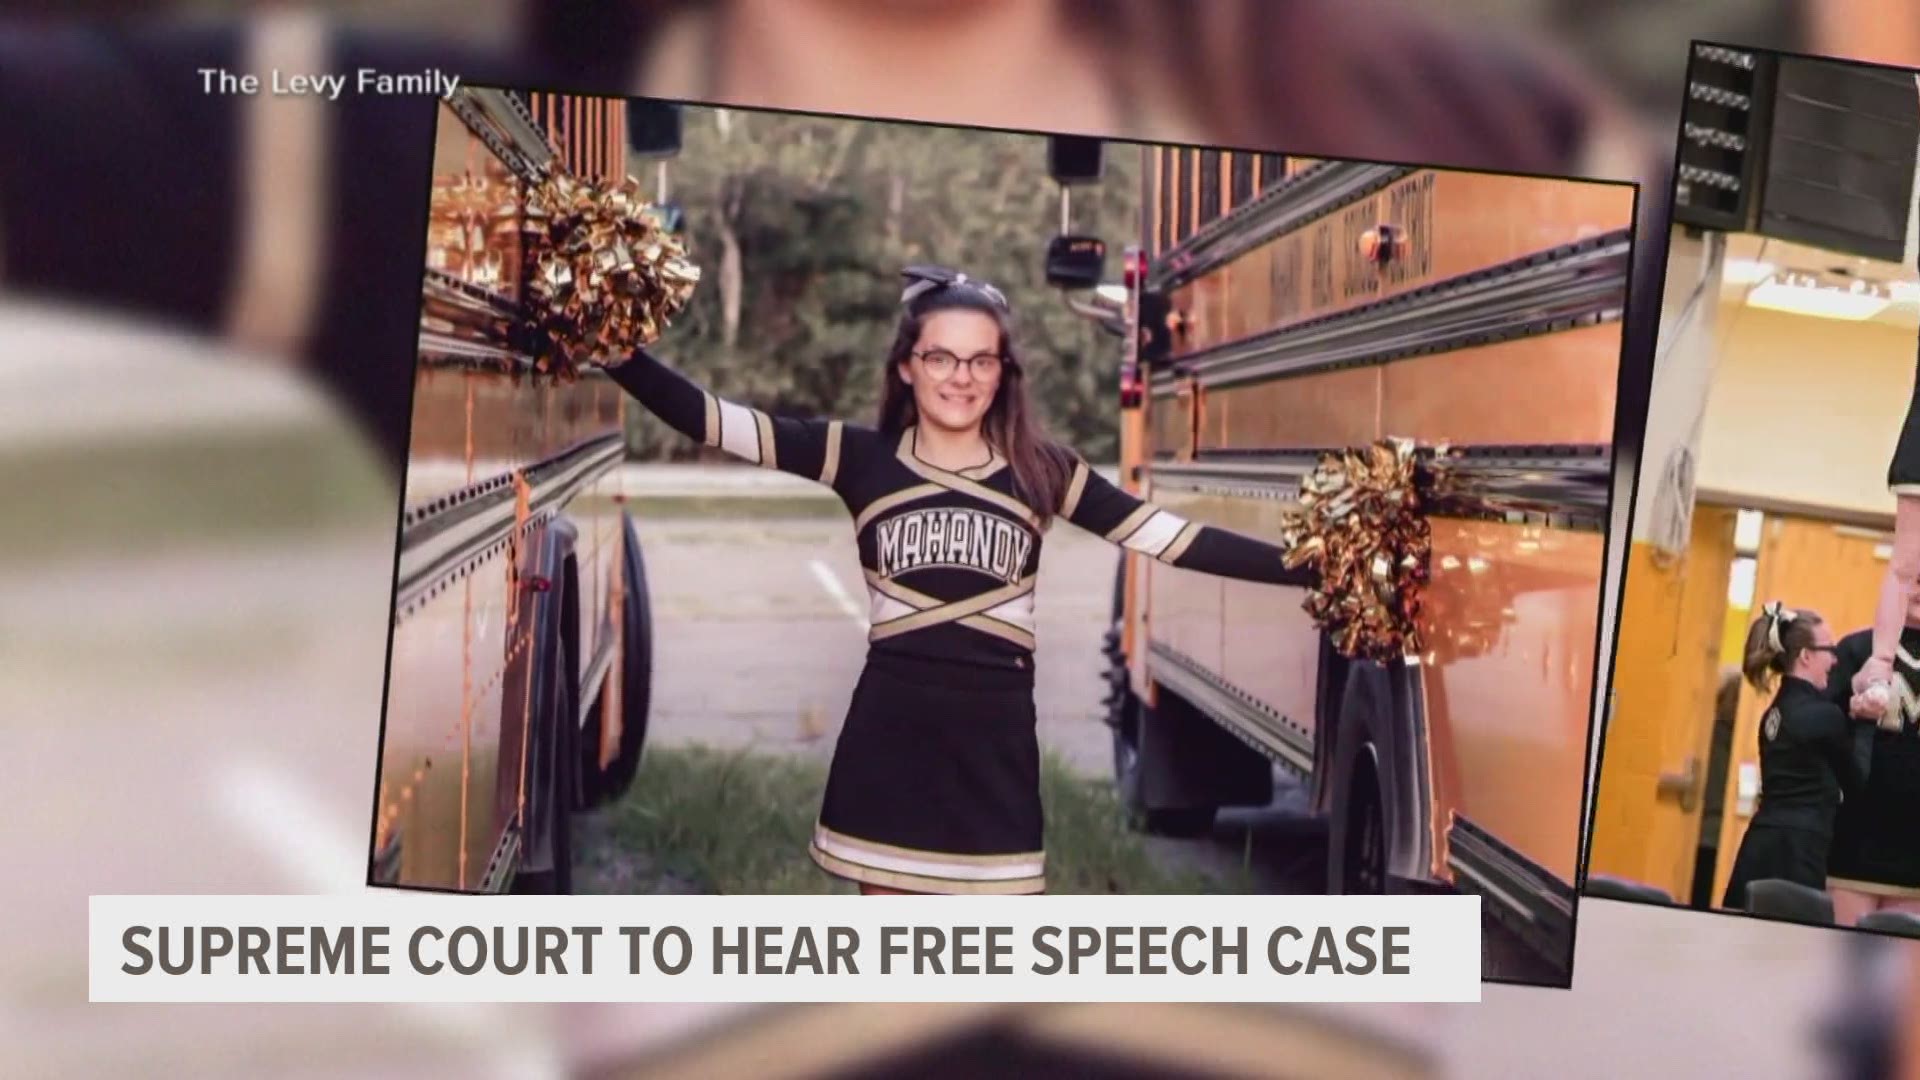 Fourteen-year-old Brandi Levy was suspended from cheerleading over a profanity-laced posting on Snapchat.